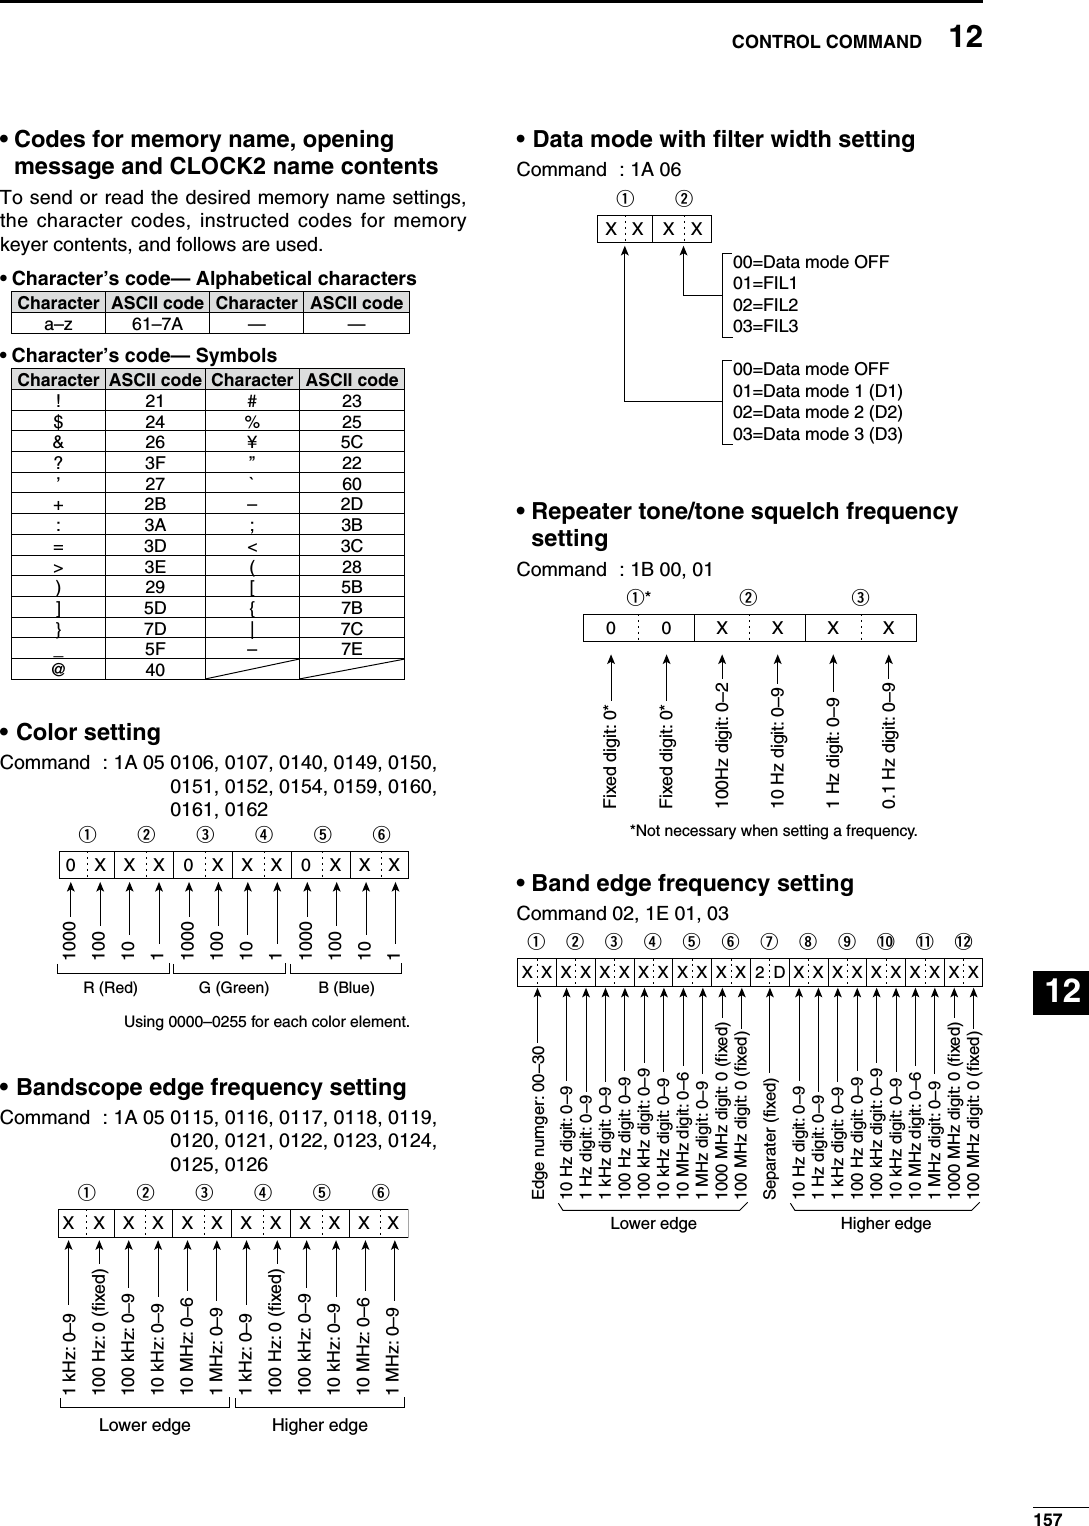 •  Codes for memory name, opening message and CLOCK2 name contentsTo send or read the desired memory name settings, the character codes, instructed codes for memory keyer contents, and follows are used. • Character’s code— Alphabetical charactersCharacter ASCII code Character ASCII codea–z 61–7A — —• Character’s code— Symbols Character ASCII code Character ASCII code!21#23$24%25&amp;26¥ 5C?3F ” 22’27`60+2B– 2D:3A; 3B=3D&lt; 3C&gt;3E ( 28)29[ 5B]5D{ 7B}7D| 7C_5F– 7E@40• Color setting Command  : 1A 05  0106, 0107, 0140, 0149, 0150, 0151, 0152, 0154, 0159, 0160, 0161, 01621000100101q0XXX0XXX0XXXwerty10001001011000100101R (Red) G (Green) B (Blue)Using 0000–0255 for each color element.• Bandscope edge frequency settingCommand  : 1A 05  0115, 0116, 0117, 0118, 0119, 0120, 0121, 0122, 0123, 0124, 0125, 01261 kHz: 0–9100 Hz: 0 (fixed)100 kHz: 0–910 kHz: 0–910 MHz: 0–61 MHz: 0–91 kHz: 0–9100 Hz: 0 (fixed)100 kHz: 0–910 kHz: 0–910 MHz: 0–61 MHz: 0–9qXXXXXXXXXXXXwertyLower edge Higher edge• Data mode with filter width settingCommand  : 1A 06qXX XXw00=Data mode OFF01=FIL102=FIL203=FIL300=Data mode OFF01=Data mode 1 (D1)02=Data mode 2 (D2)03=Data mode 3 (D3)•  Repeater tone/tone squelch frequency settingCommand  : 1B 00, 01100Hz digit: 0–210 Hz digit: 0–91 Hz digit: 0–90.1 Hz digit: 0–9Fixed digit: 0*Fixed digit: 0*q*00XXXweX*Not necessary when setting a frequency.• Band edge frequency settingCommand 02, 1E 01, 03qXXXwertyuio!0 !1 !2XXXXXXXXX2DXXXXXXXXXX10 Hz digit: 0–91 Hz digit: 0–91 kHz digit: 0–9100 Hz digit: 0–9100 kHz digit: 0–910 kHz digit: 0–910 MHz digit: 0–61 MHz digit: 0–91000 MHz digit: 0 (fixed)100 MHz digit: 0 (fixed)10 Hz digit: 0–91 Hz digit: 0–91 kHz digit: 0–9100 Hz digit: 0–9100 kHz digit: 0–910 kHz digit: 0–910 MHz digit: 0–61 MHz digit: 0–91000 MHz digit: 0 (fixed)100 MHz digit: 0 (fixed)Separater (fixed)Lower edge Higher edgeEdge numger: 00–3015712CONTROL COMMAND123456789101112131415161718192021